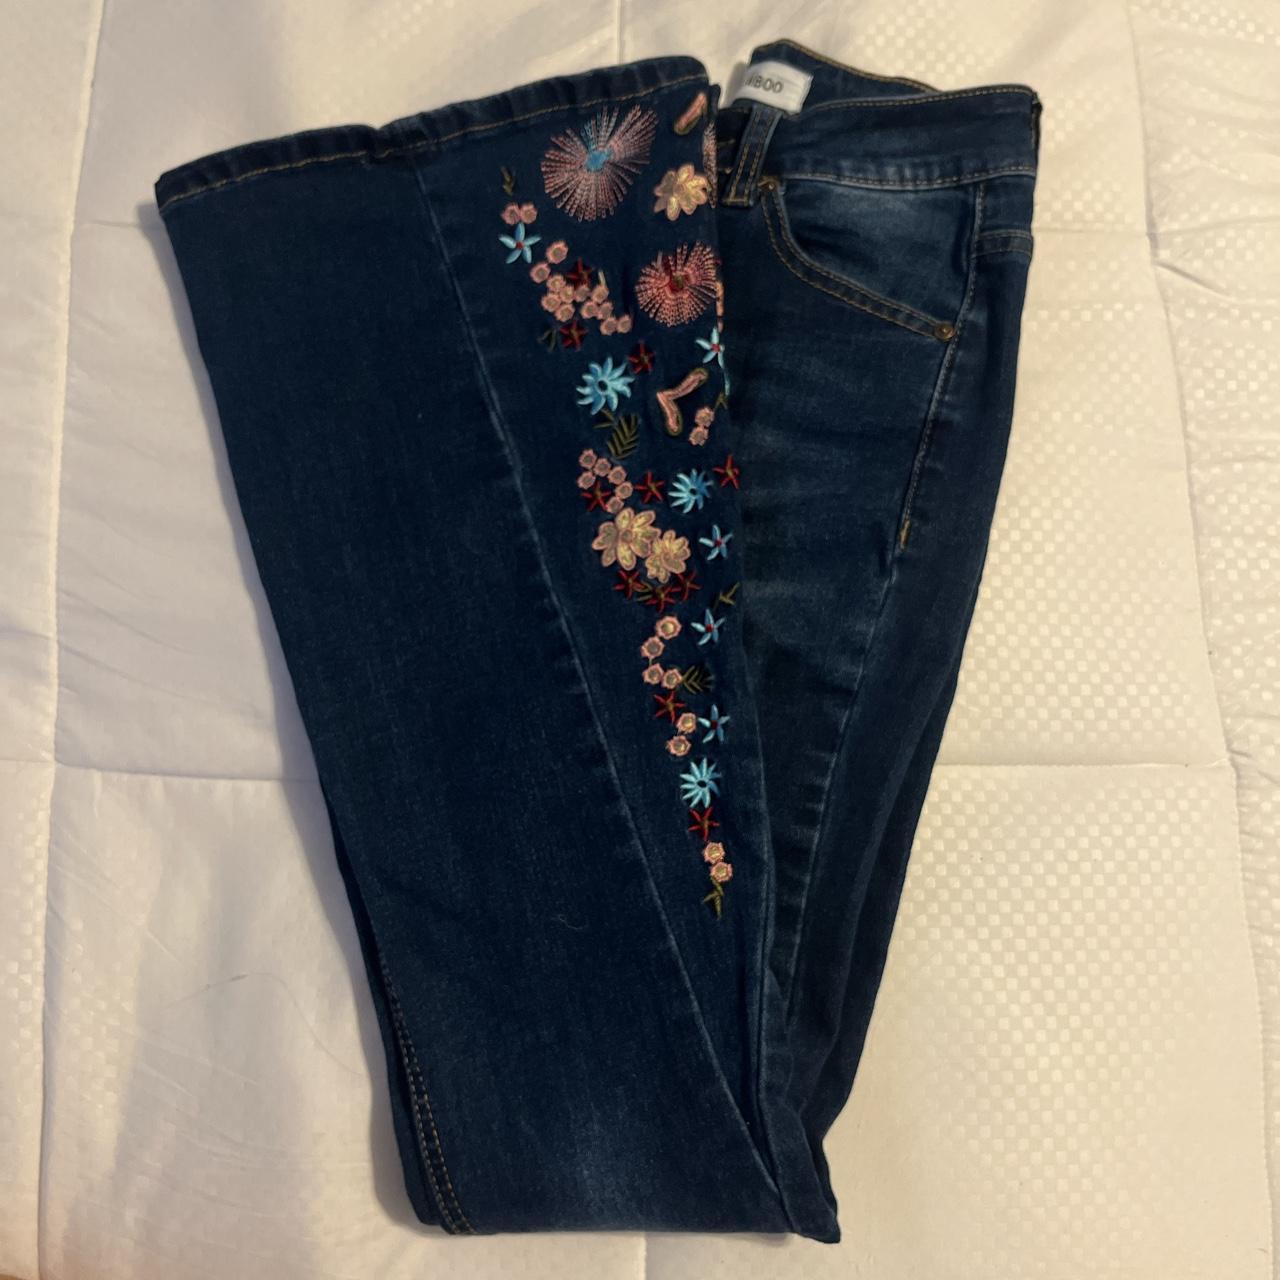 BAMBOO embroidered blue flared jeans -never worn I... - Depop